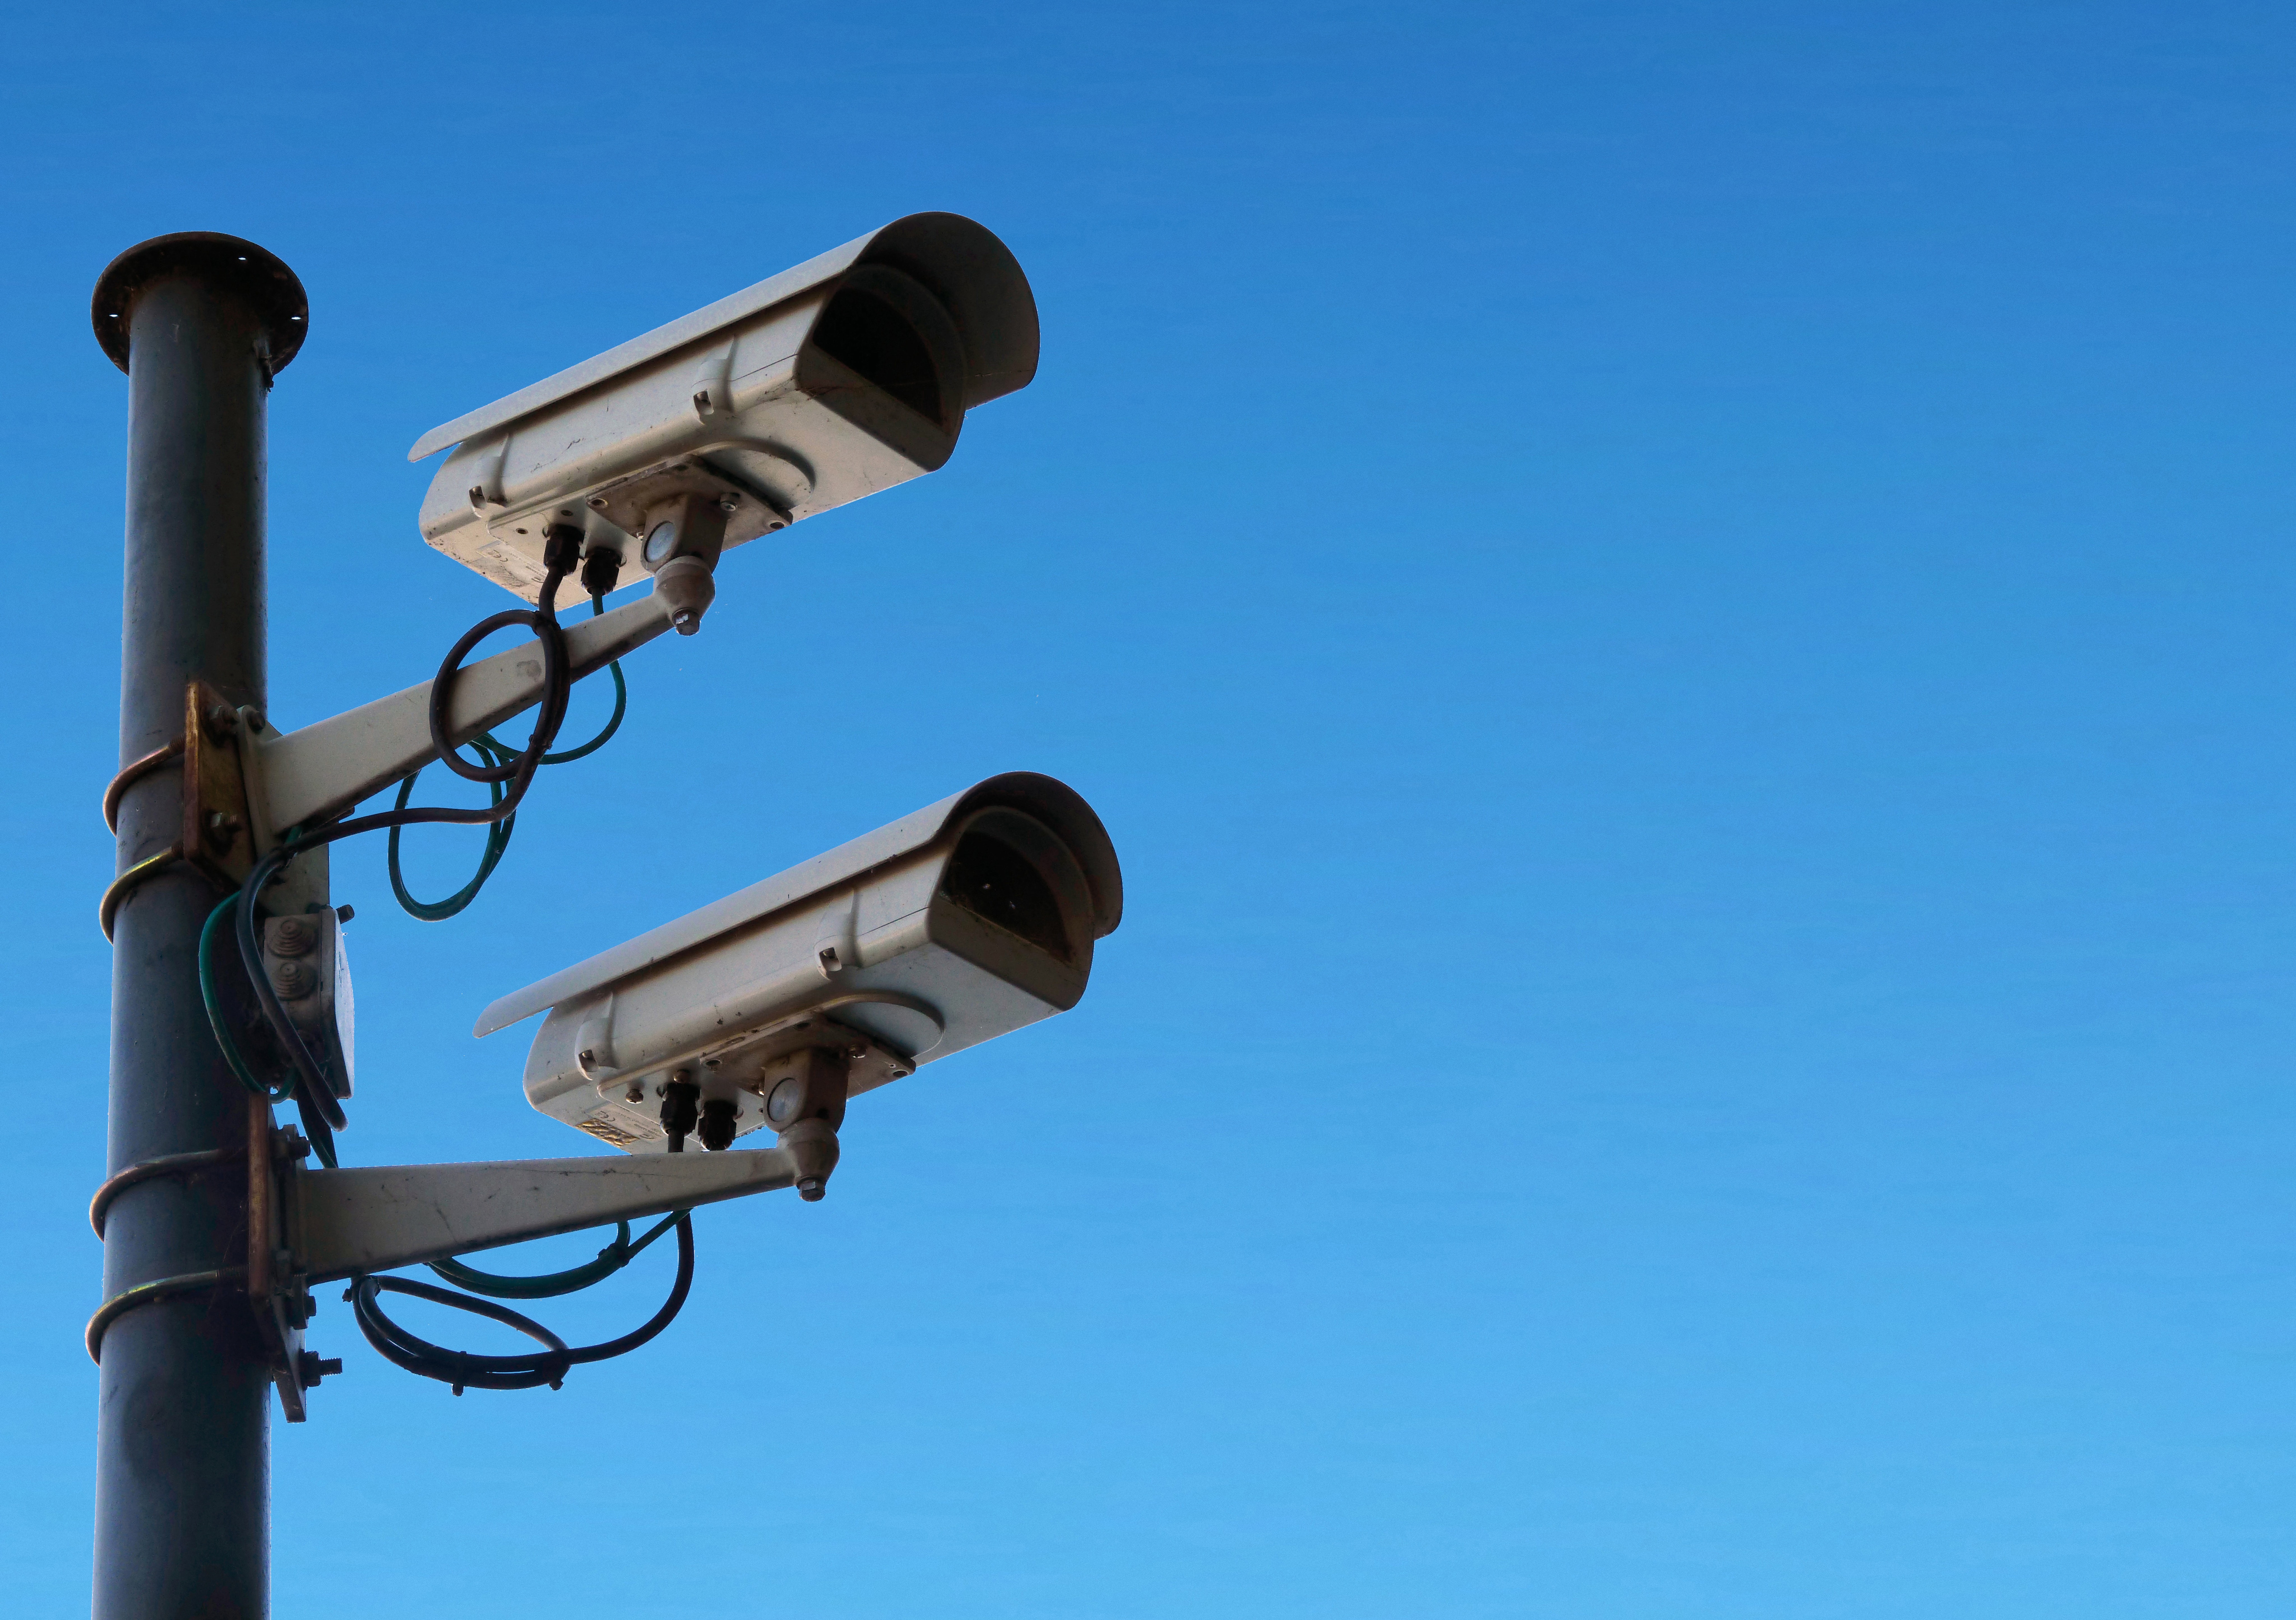 CCTV that is used for security